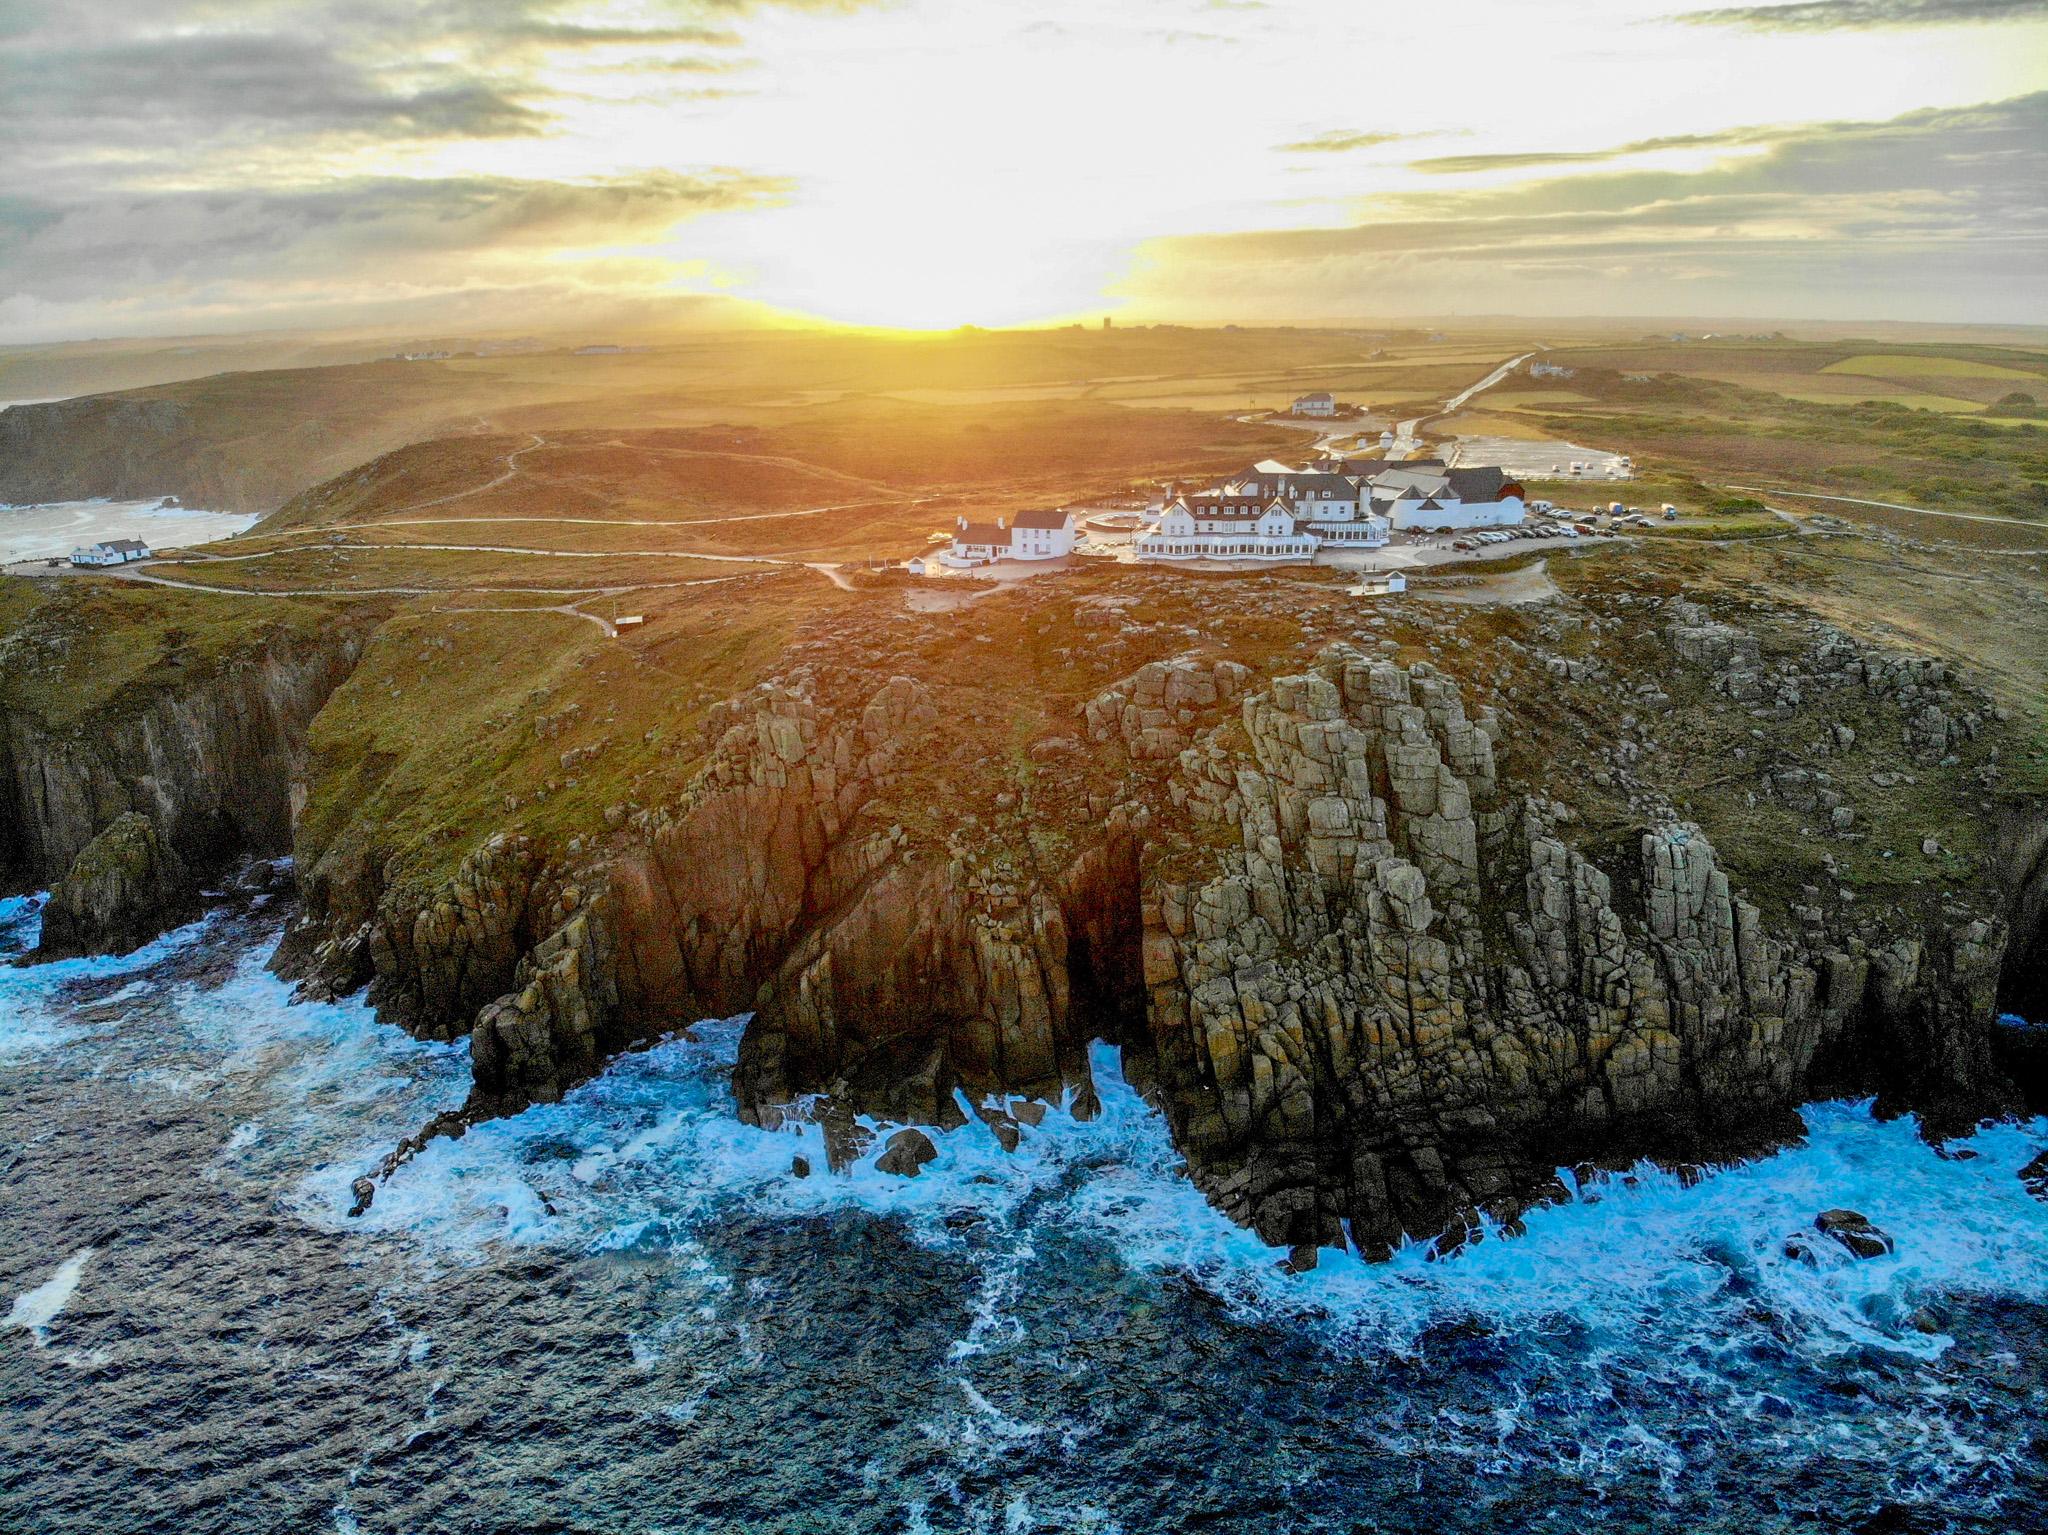 Sunset and sunrise at Land's End